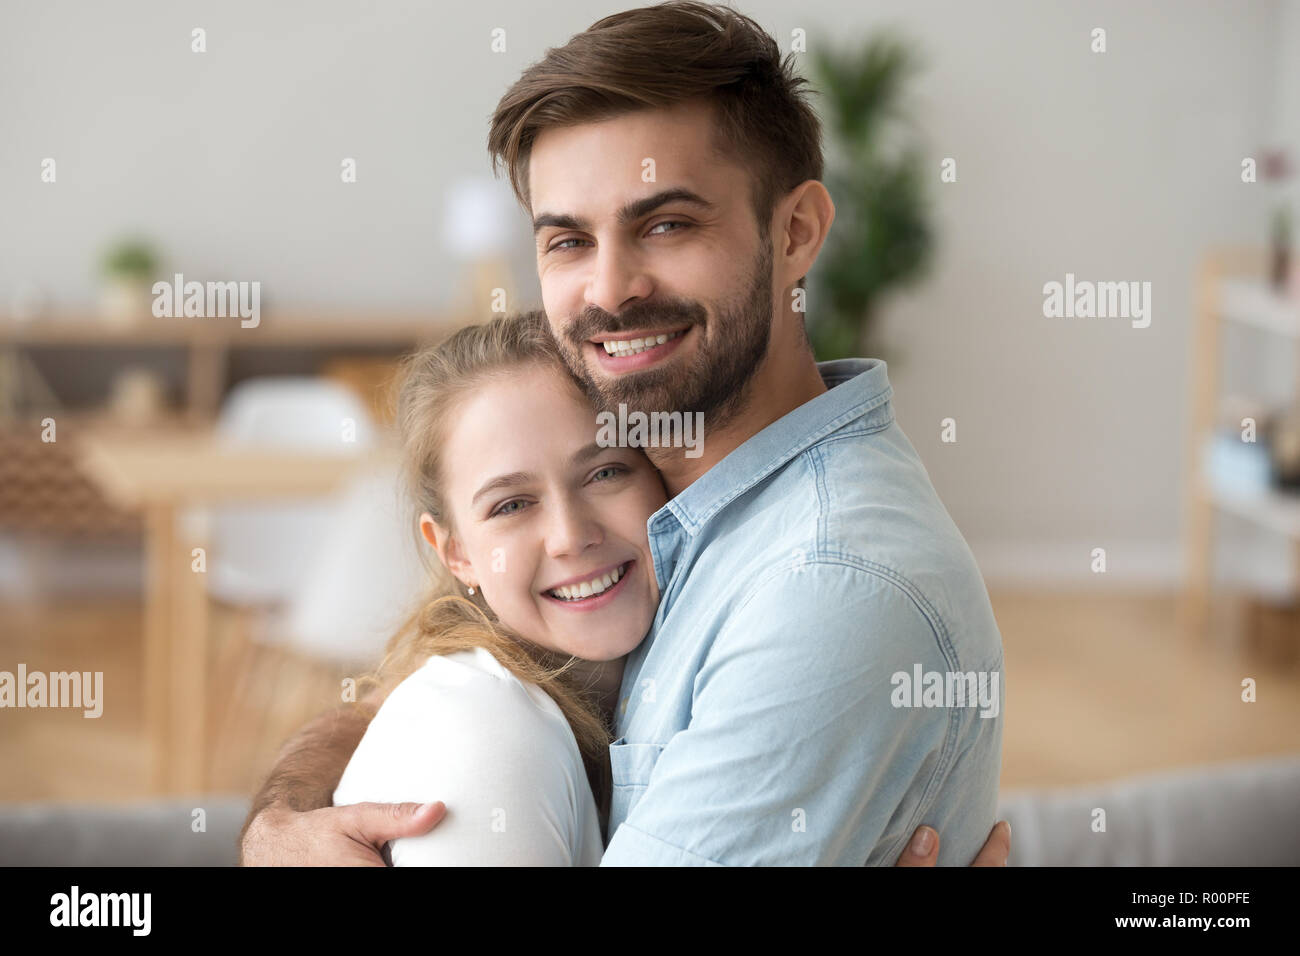 Pretty millennial just a married couple embracing indoors Stock Photo